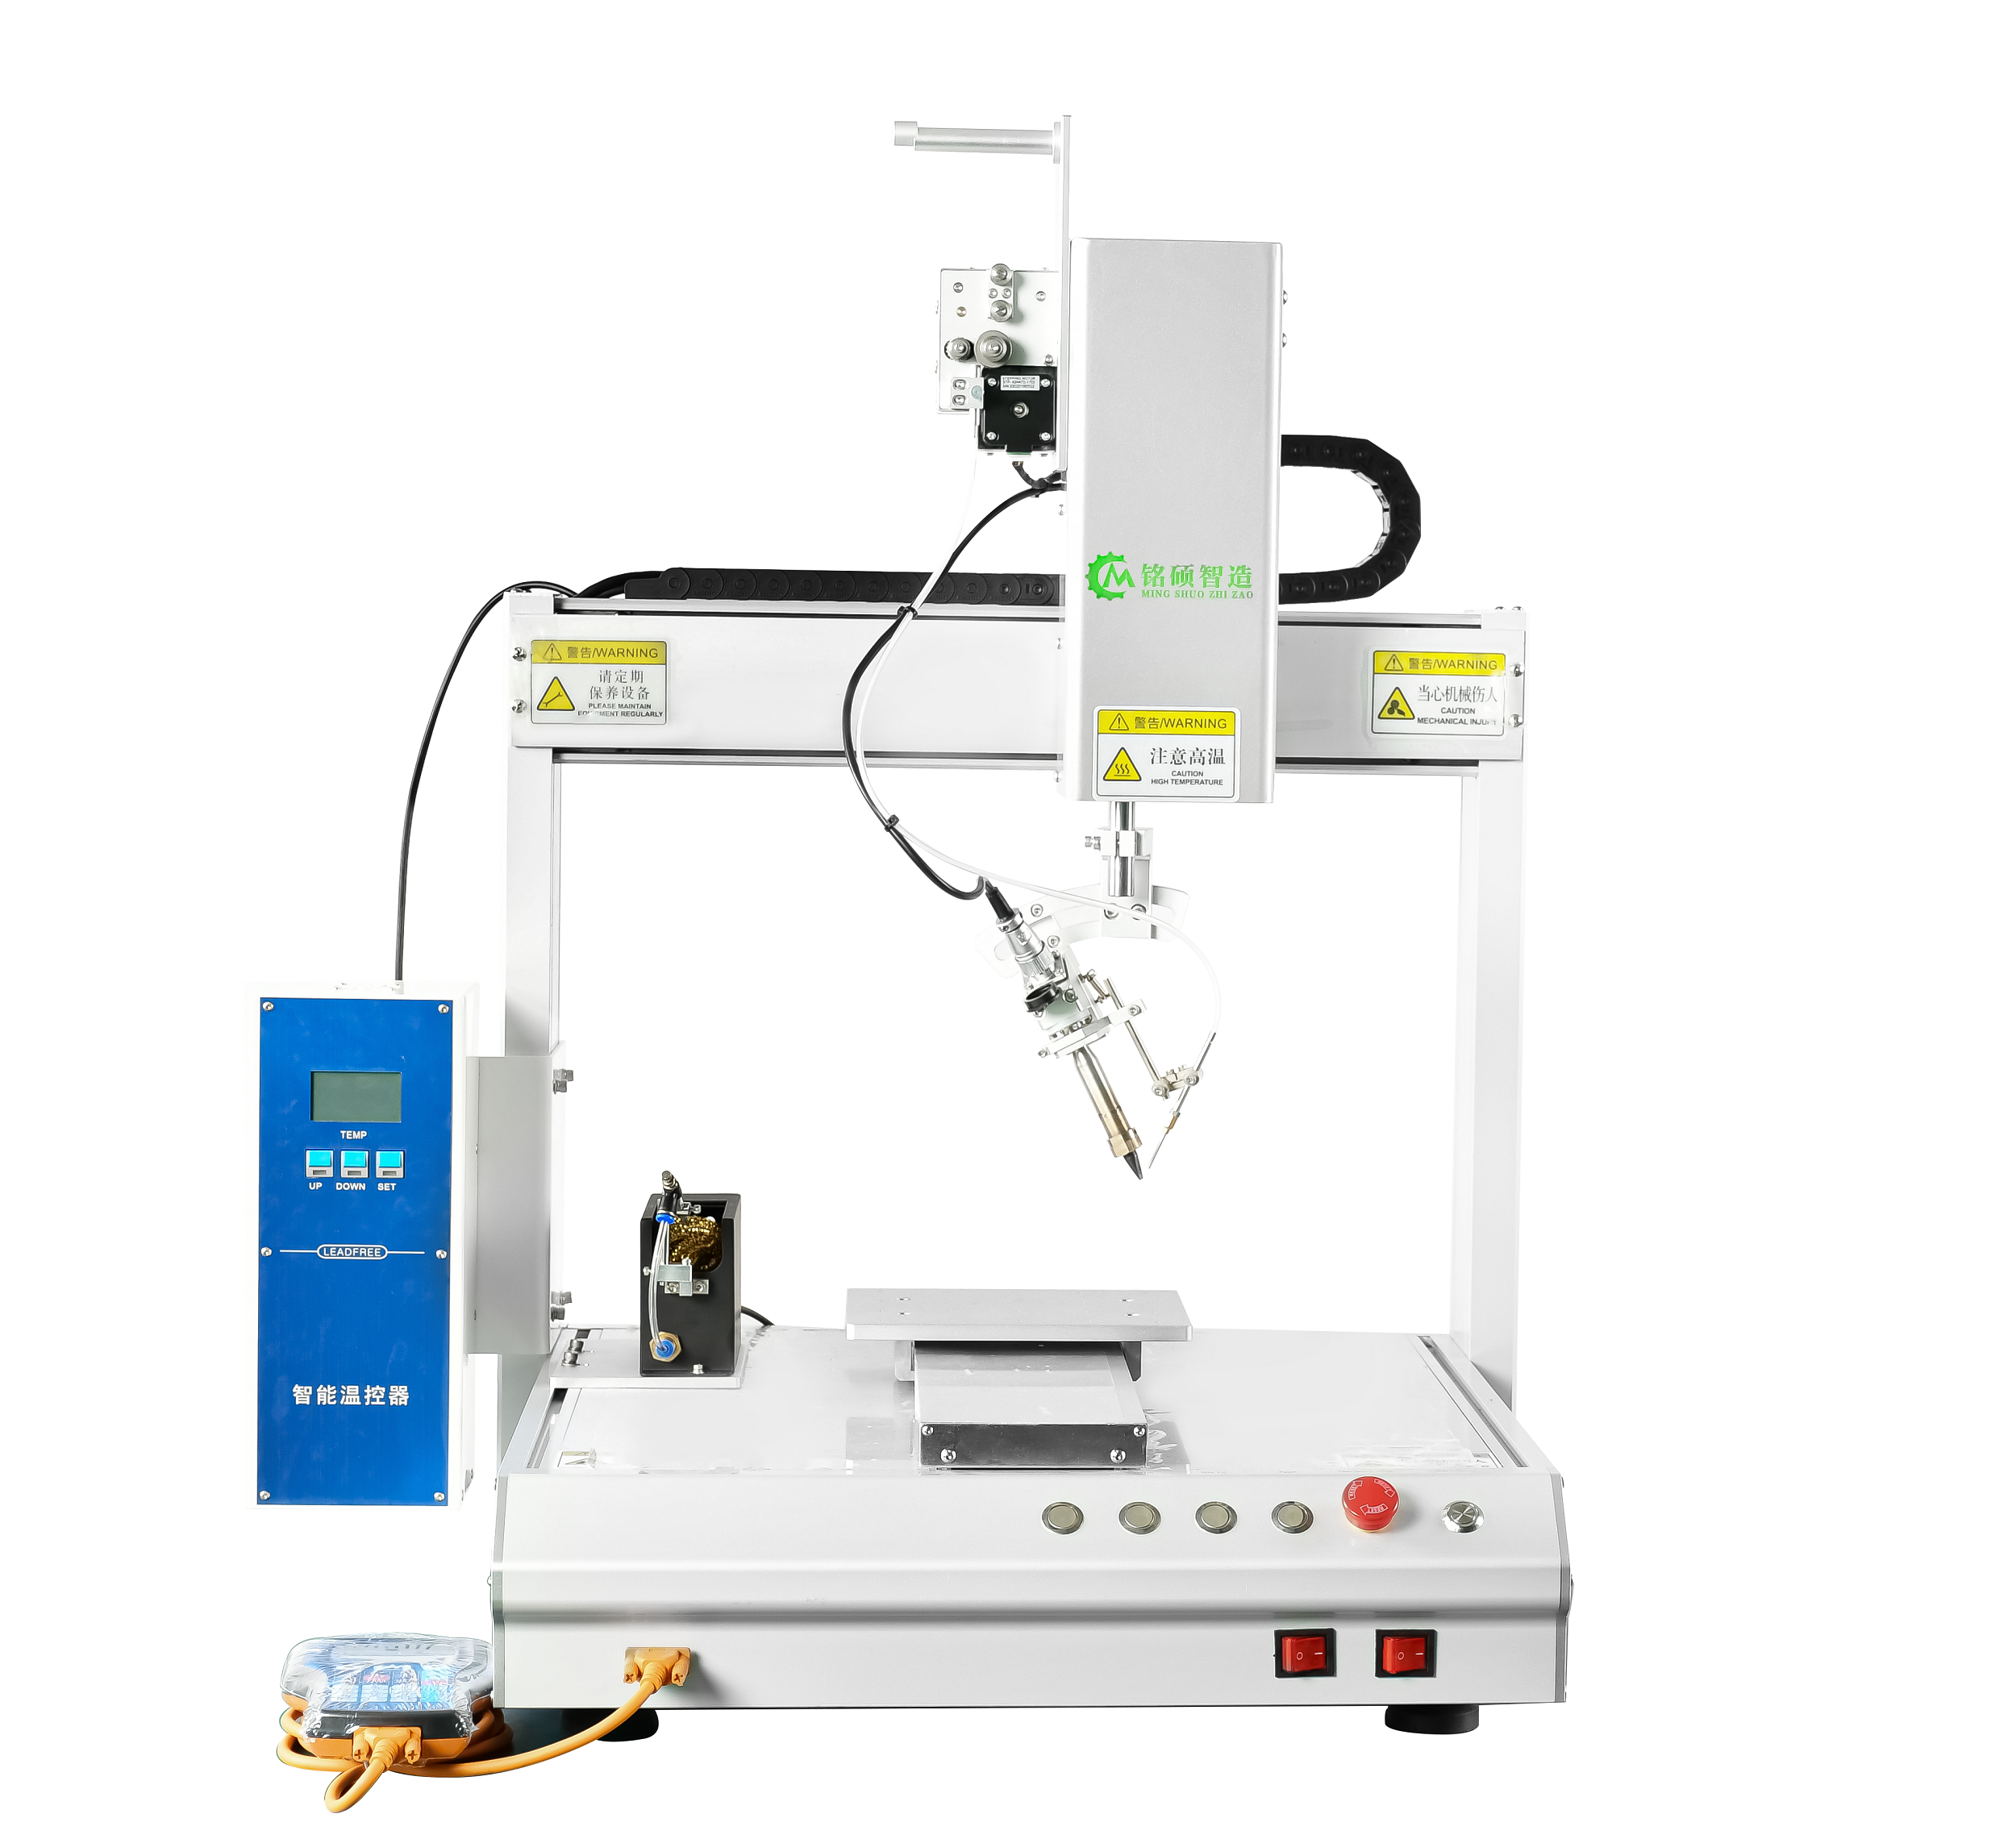 Introducing our High-Quality Soldering Machine for Your Welding Needs